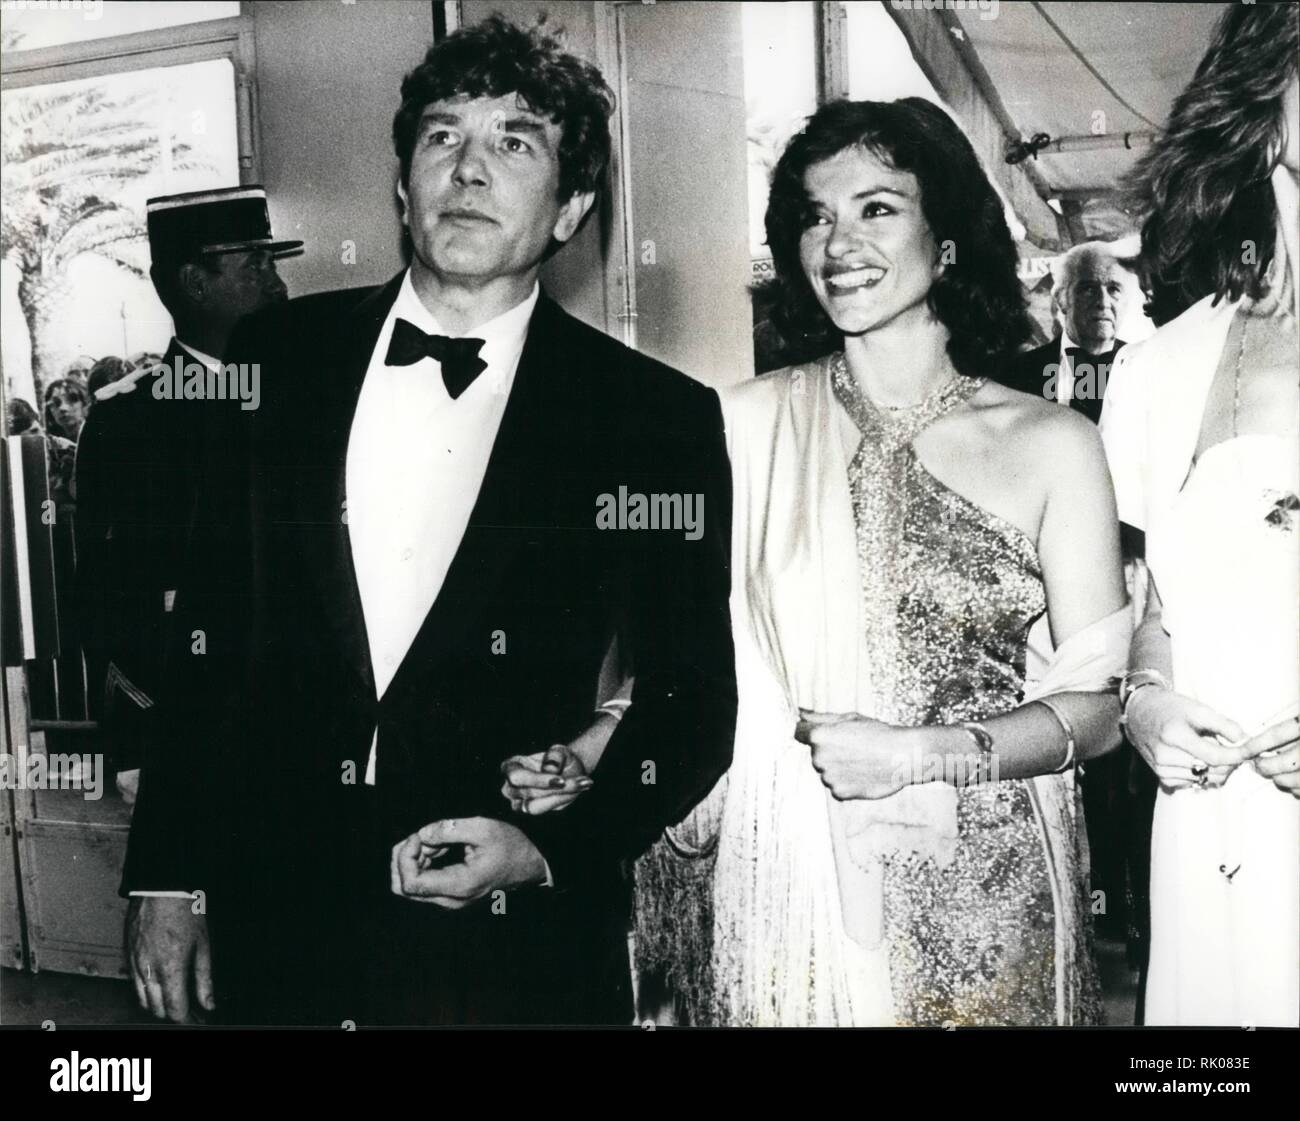 Apr. 04, 1979 - Albert Finney and his girlfriend actress Diana quick missing on boat trip up the Amazon: Actor Albert Finney and his girl friend actress Diana Quick, have been reported missing. The Couple had arranged a meeting with actor Michael medwin, who is co-director with Finney of Memorial Films, a production company, which should have taken place last week in Los Angeles. Mr. Medwin said he is worried as Finney was so punctilious where business is concerned. Photo shows Albert Finney and actress Diana Quick, who are missing after a boat trip up the Amazon. (Credit Image: © Keystone Pre Stock Photo